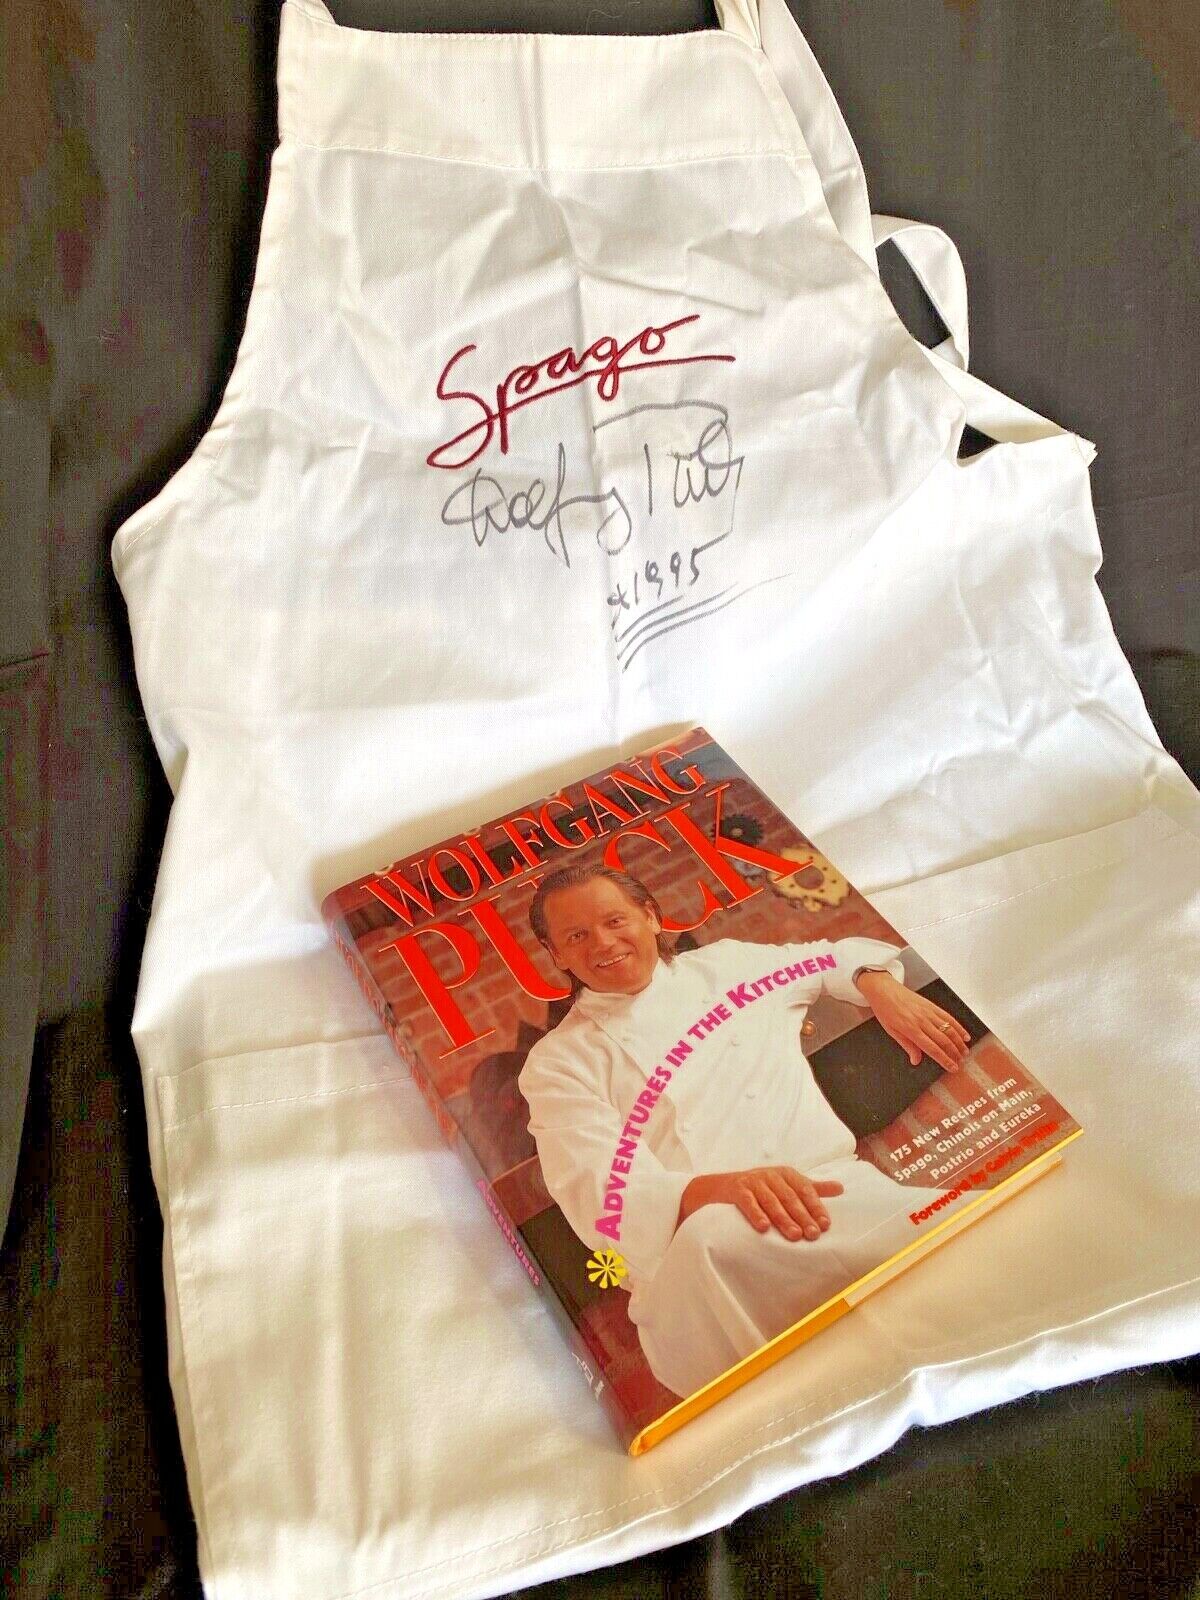 WOLFGANG PUCK SIGNED "SPAGO" APRON + "ADVENTURES IN THE KITCHEN" BOOK Без бренда